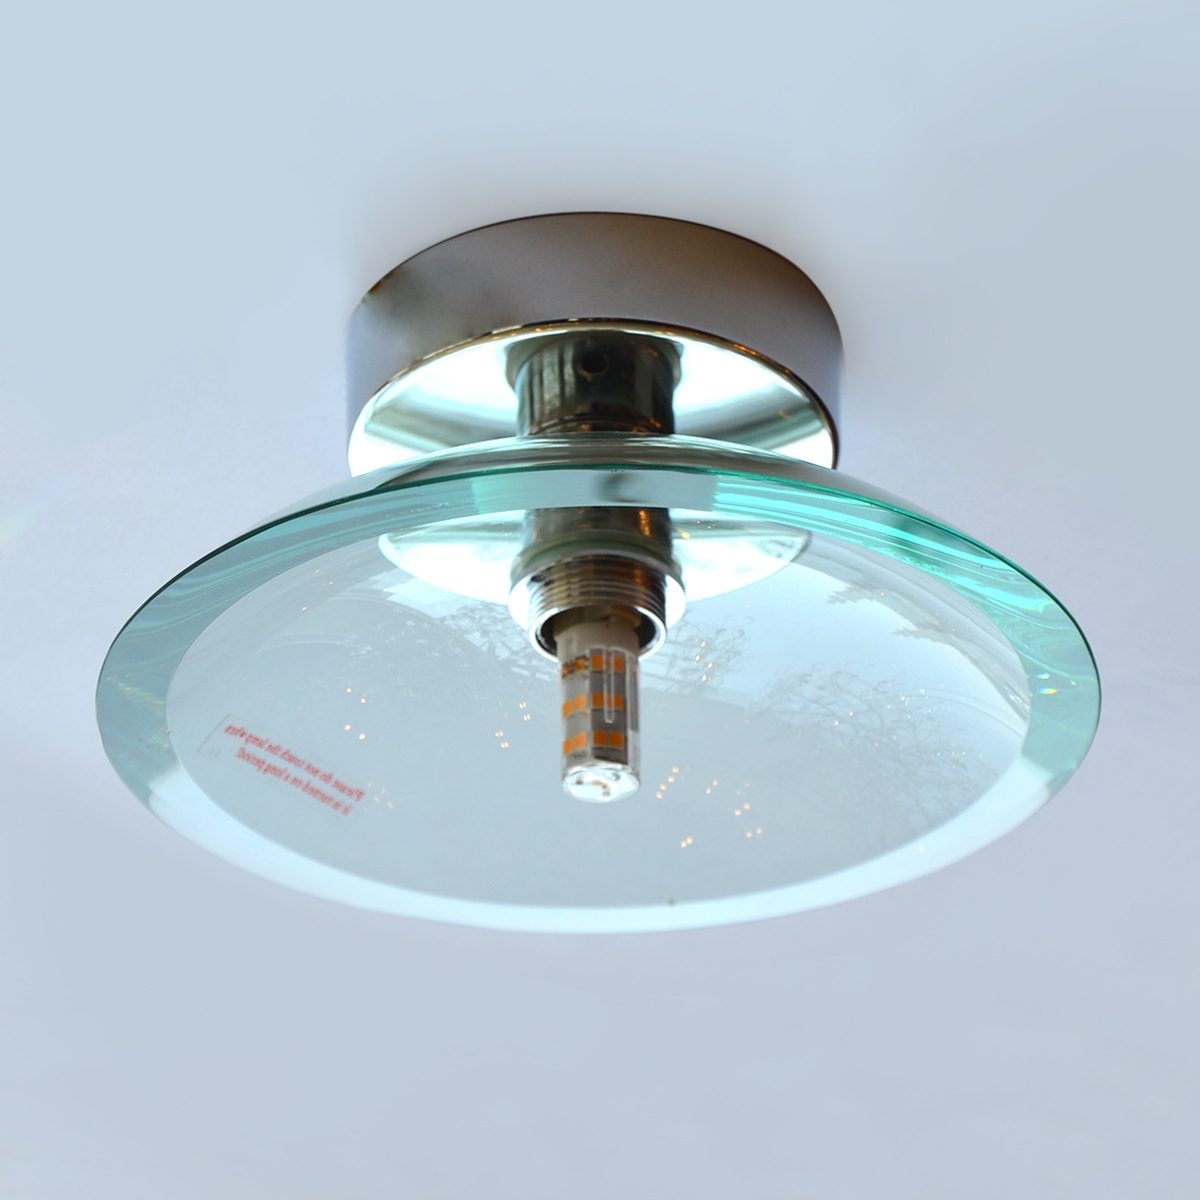 Indoor Decorative Recessed Ceiling MX6905 with Bulb- White